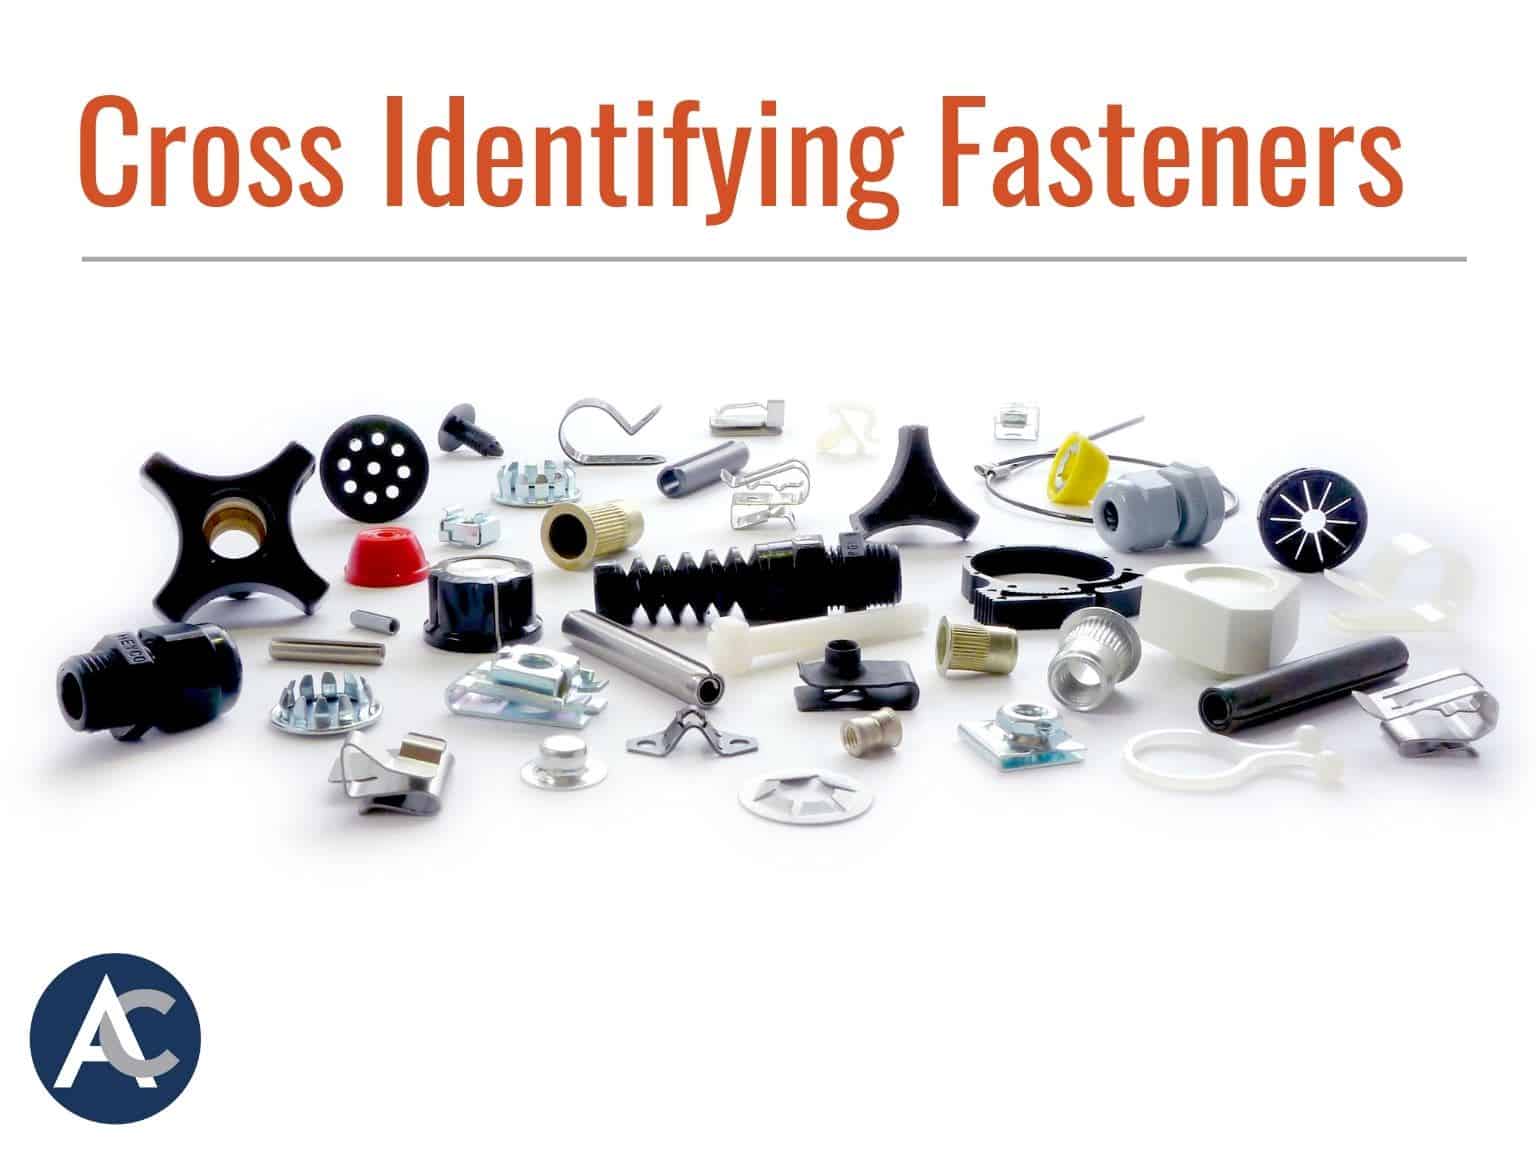 Cross Identifying Fasteners, Industrial Fasteners Cross reference